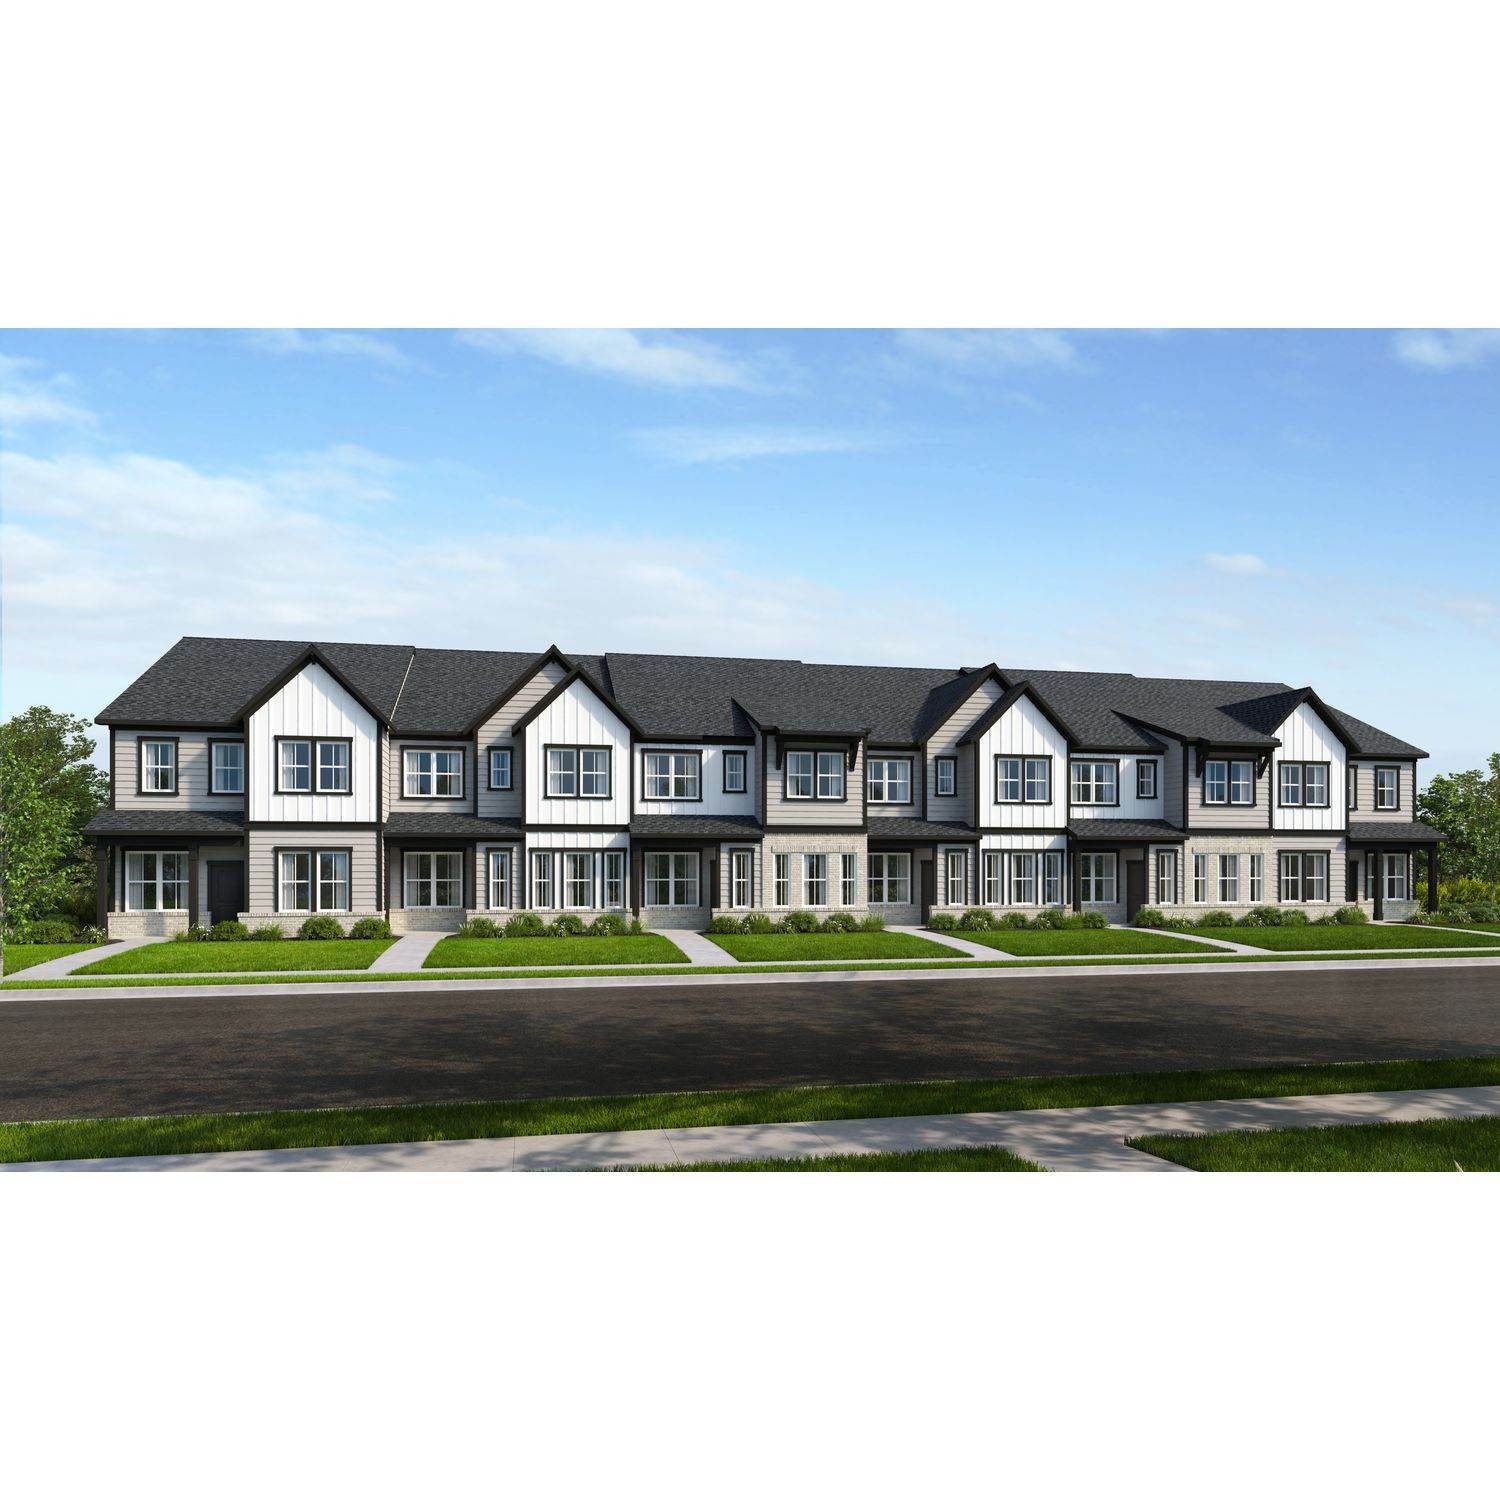 Single Family for Sale at Terraces At Farmington For Gps Purposes Only:, Harrisburg, NC 28075